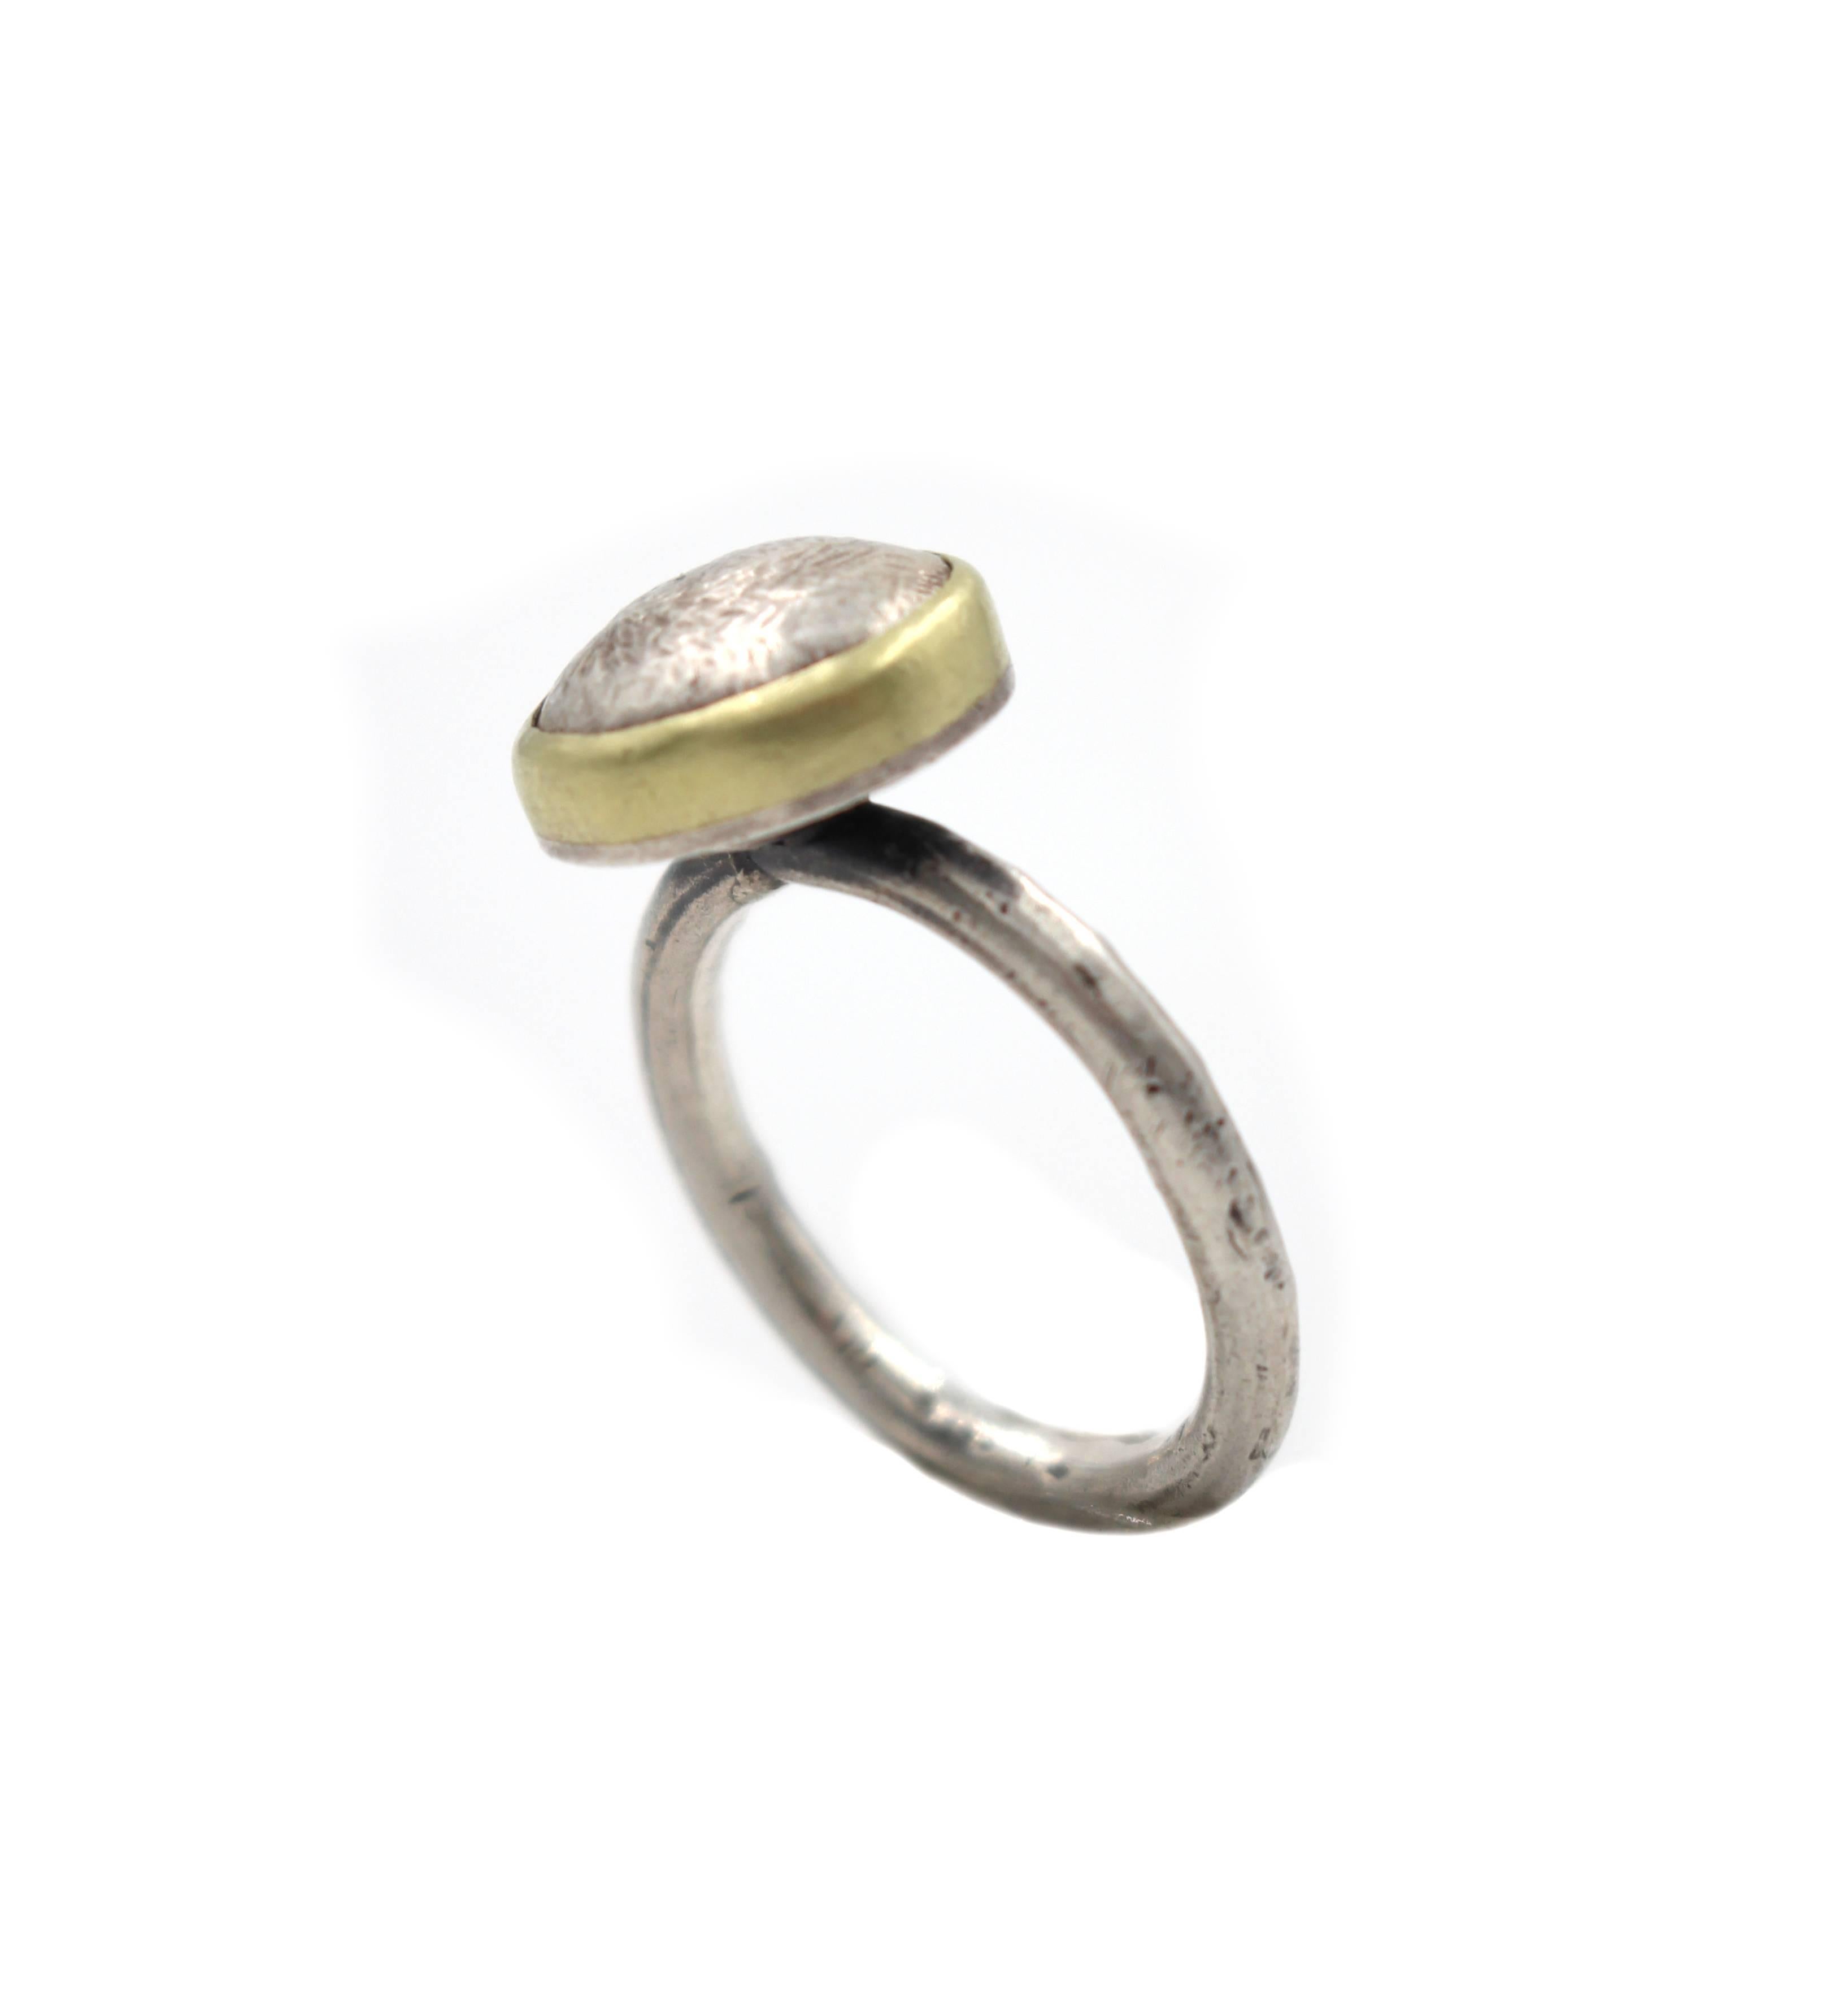 sterling silver, 14k gold

For the past twenty-five years, Robert Ebendorf has been re-purposing existing materials by devising ingenious uses for the discarded and discovering ways to make the used into the new. Known for jewelry that includes